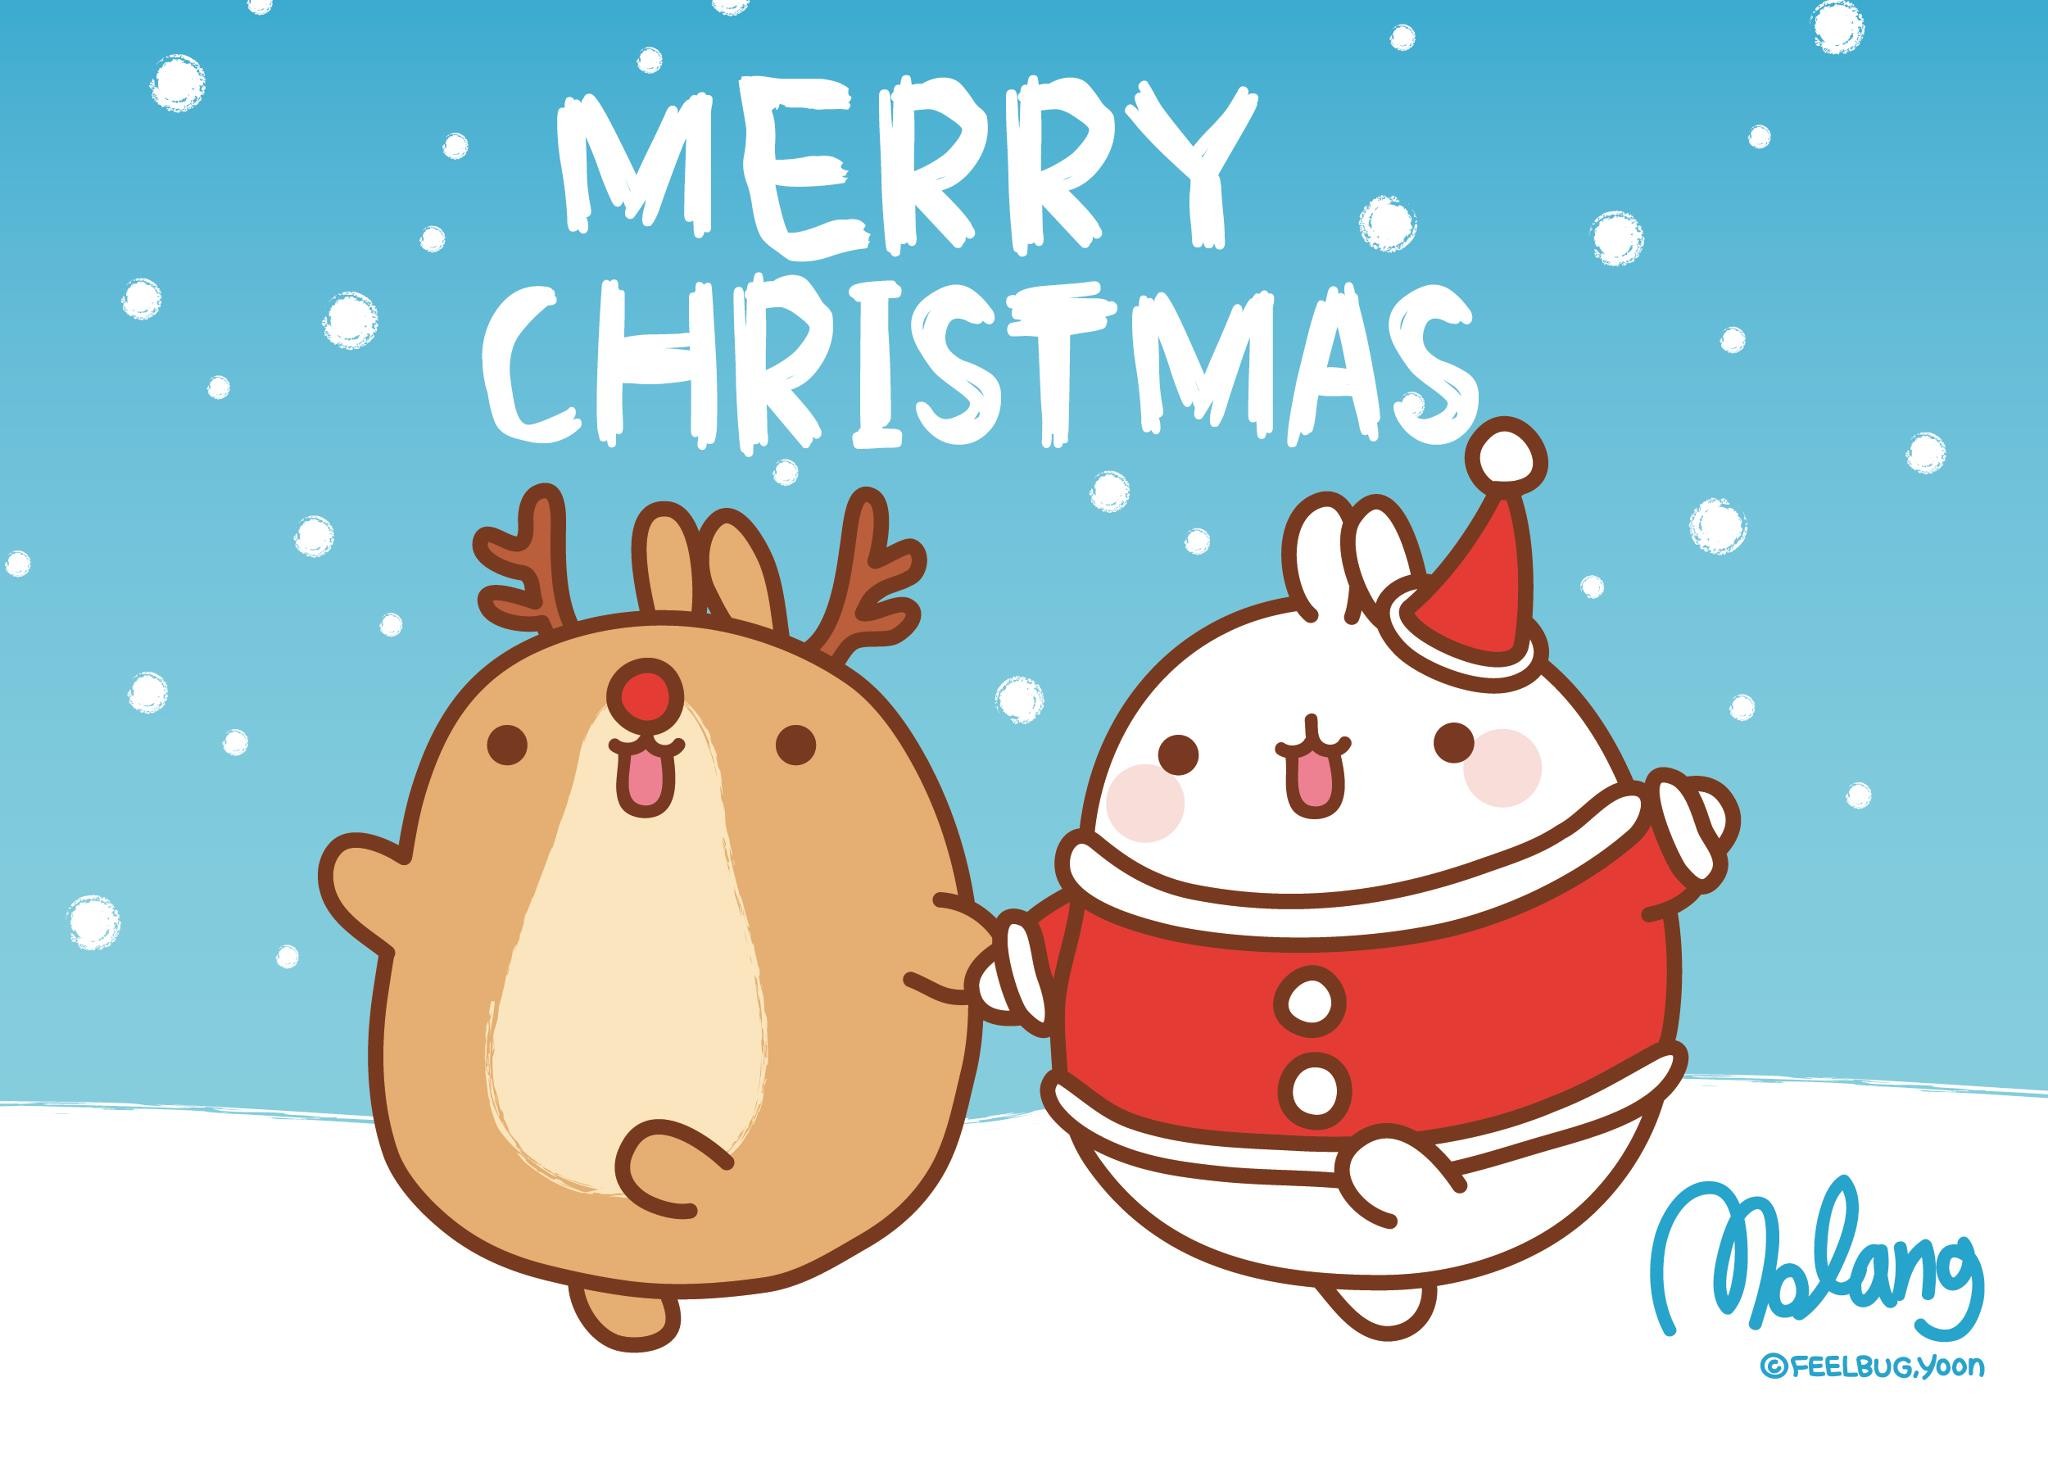 2048x1468 San-X Molang Christmas Desktop Wallpapers - Here are 3 super cute Molang  Desktop Backgrounds for Christmas! Click each image to be taken to the full  size ...